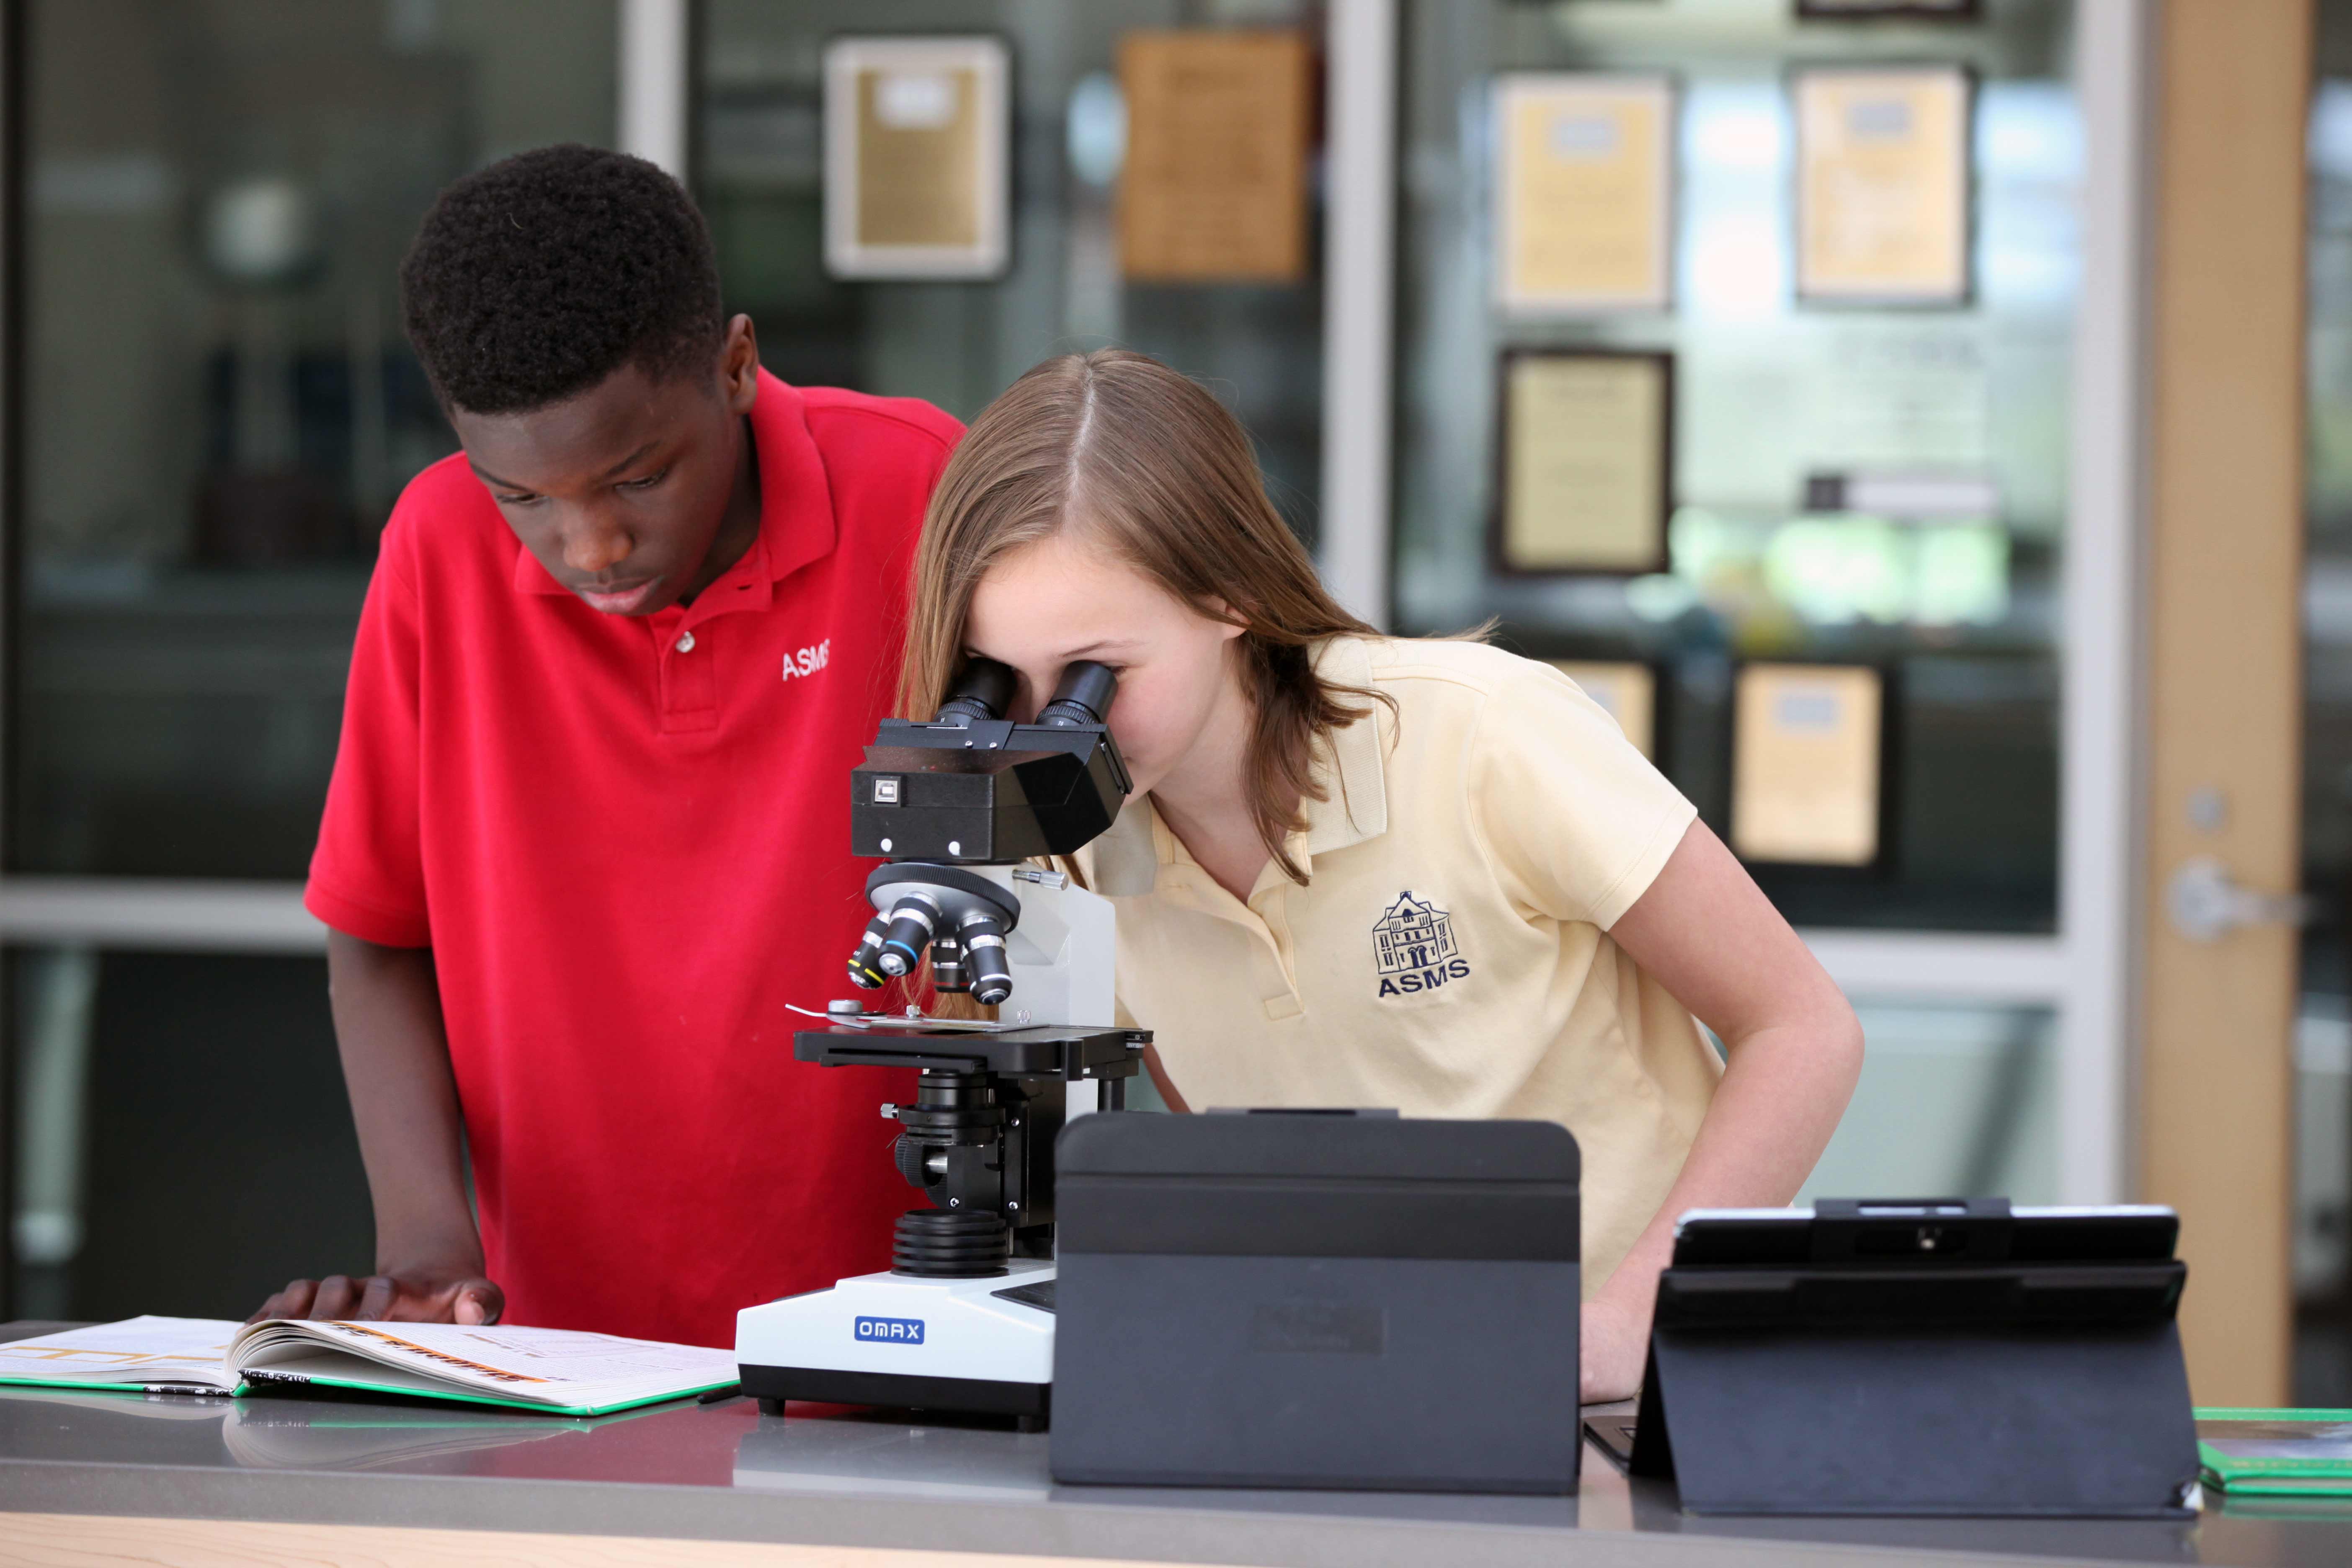 The science curriculum at ASMS encourages students to work collaboratively to solve the road blocks that real scientists face when developing experiments.